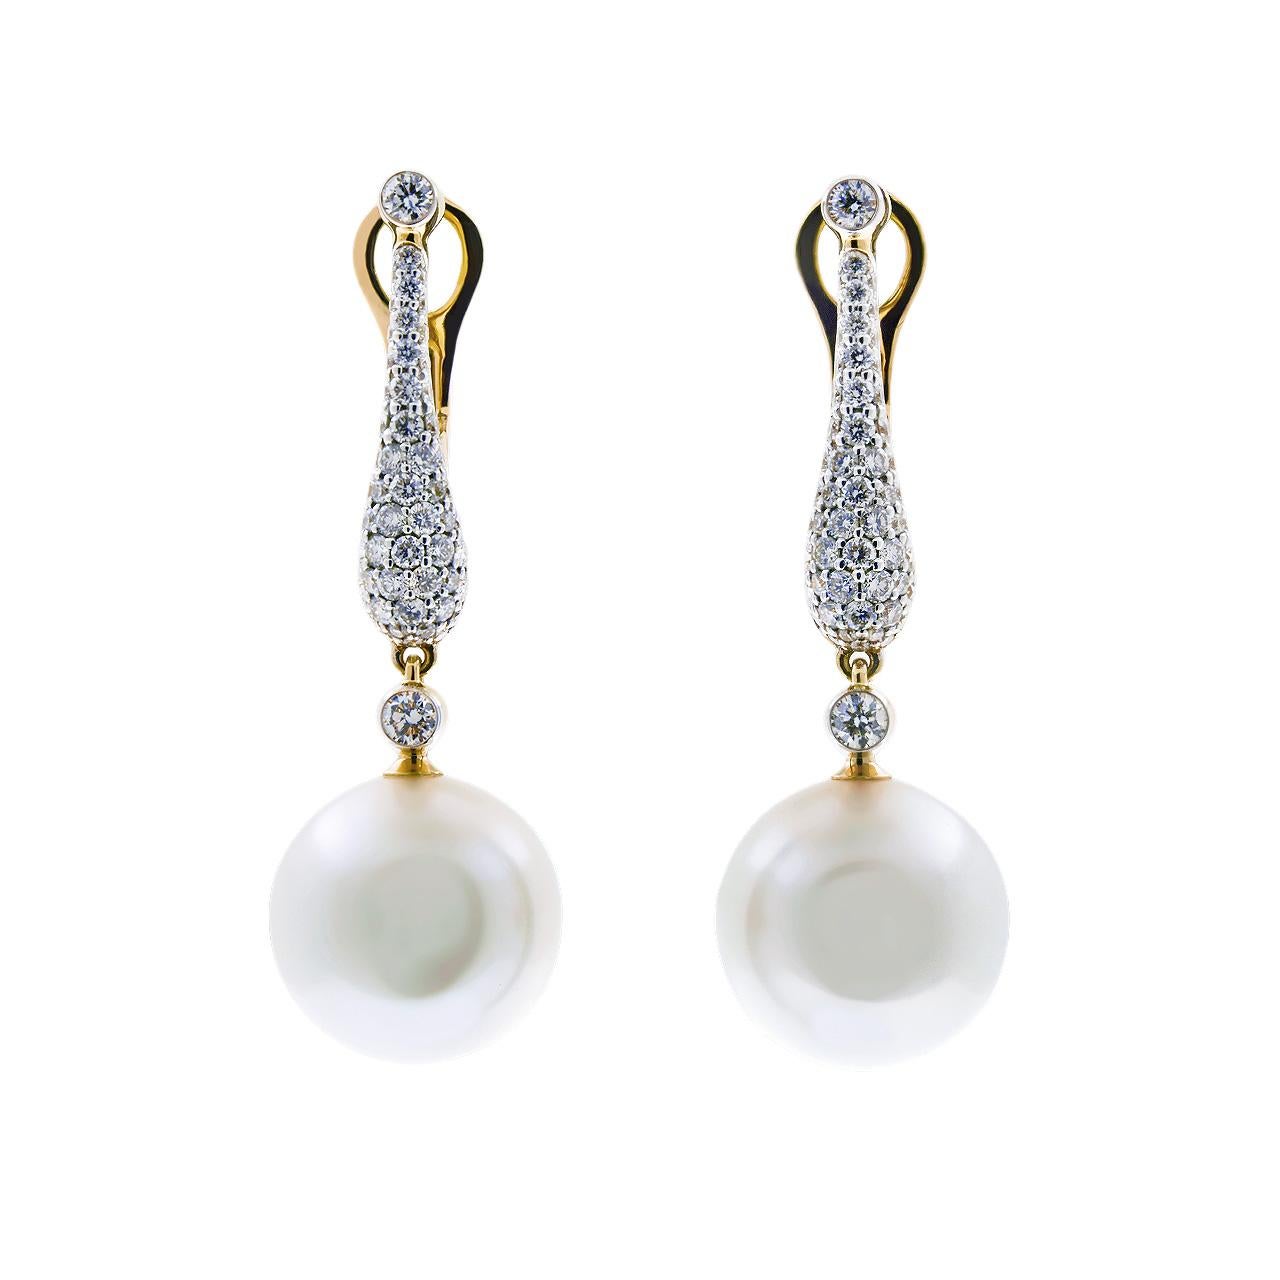 - 112 Round Diamonds – 1.12 ct, G/VVS1-VVS2
- 12.98 mm White South Sea Pearl
- 18K Yellow Gold 
- Weight: 11.07 g
These fabulous earrings from the Pearl dreams collection features two lustrous White South Sea pearls of 12.98 mm diameter. The design